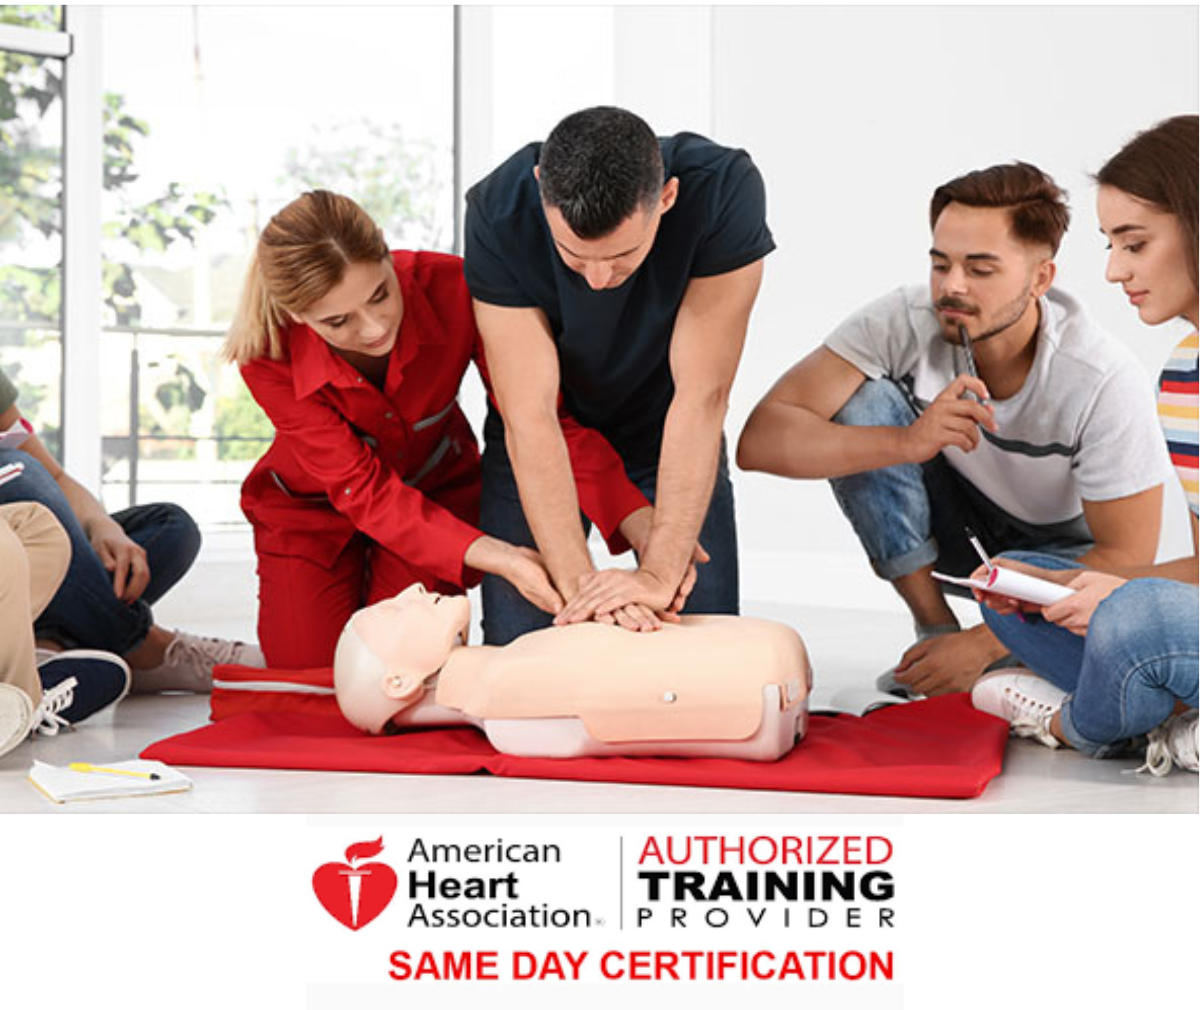 BECOME A CPR INSTRUCTOR